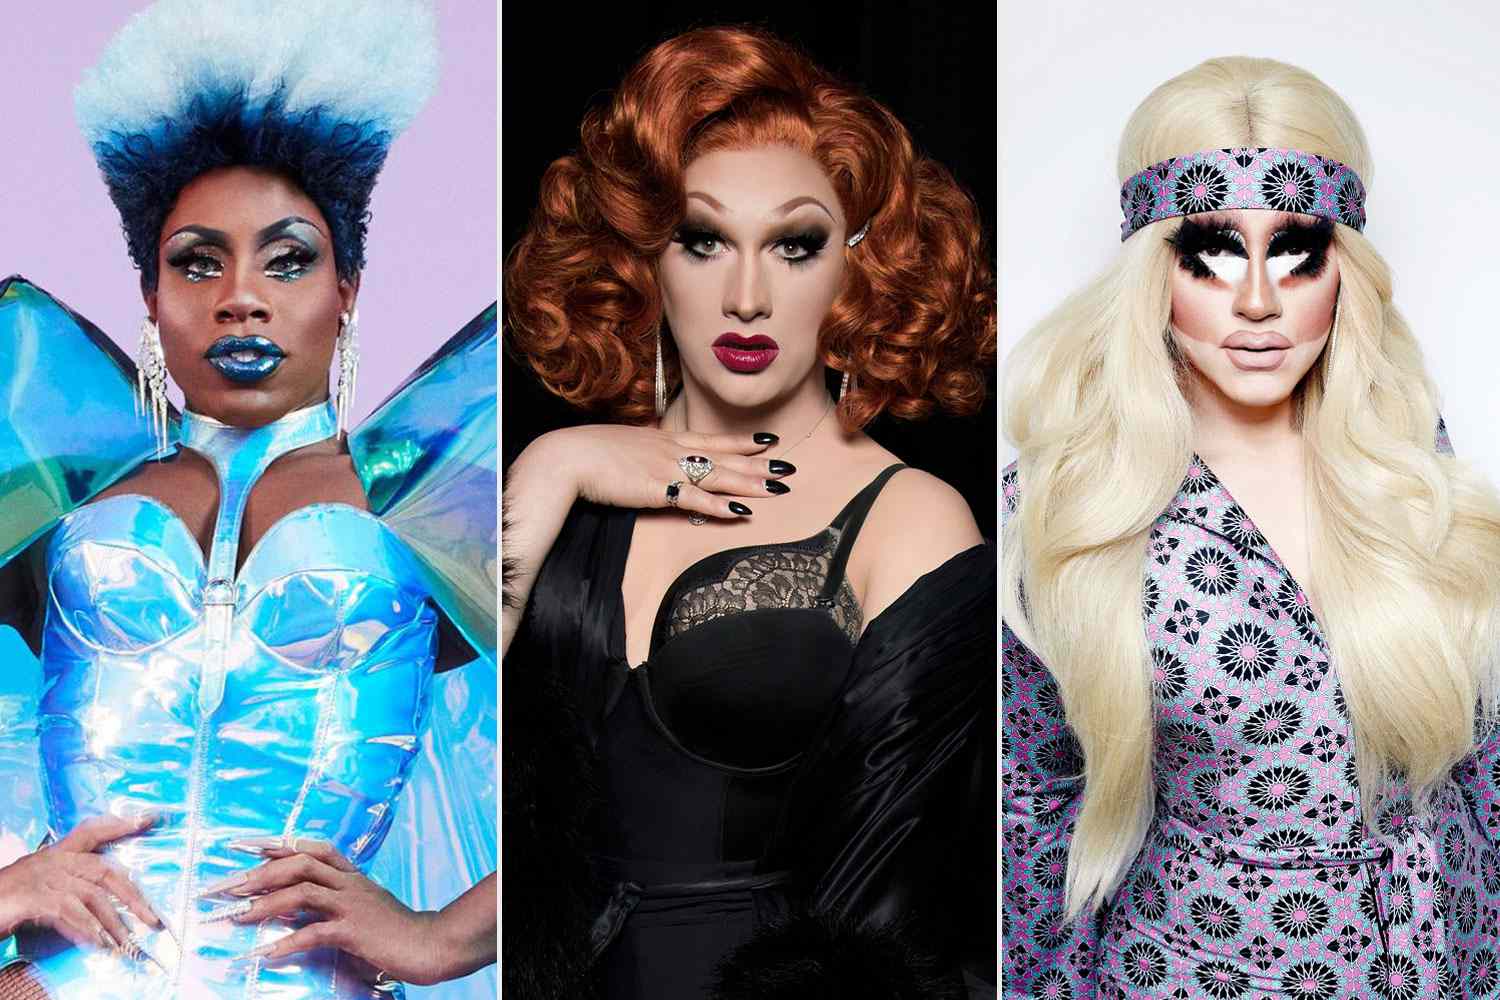 RuPaul's Drag Race All Stars Season 4 Gallery Pictured: Monét X Change Credit: Benjamin Lennox/VH1; Jinkx Monsoon CR: José Alberto Guzmán Colón; Mandatory Credit: Photo by Taylor Jewell/Invision/AP/Shutterstock (9478350c) Brian Firkus, better known as Trixie Mattel, winner of "RuPaul's Drag Race All Stars 3," poses for a portrait in New York to promote her self-released country albums, Two Birds," and "One Stone Trixie Mattel Portrait Session, New York, USA - 23 Mar 2018